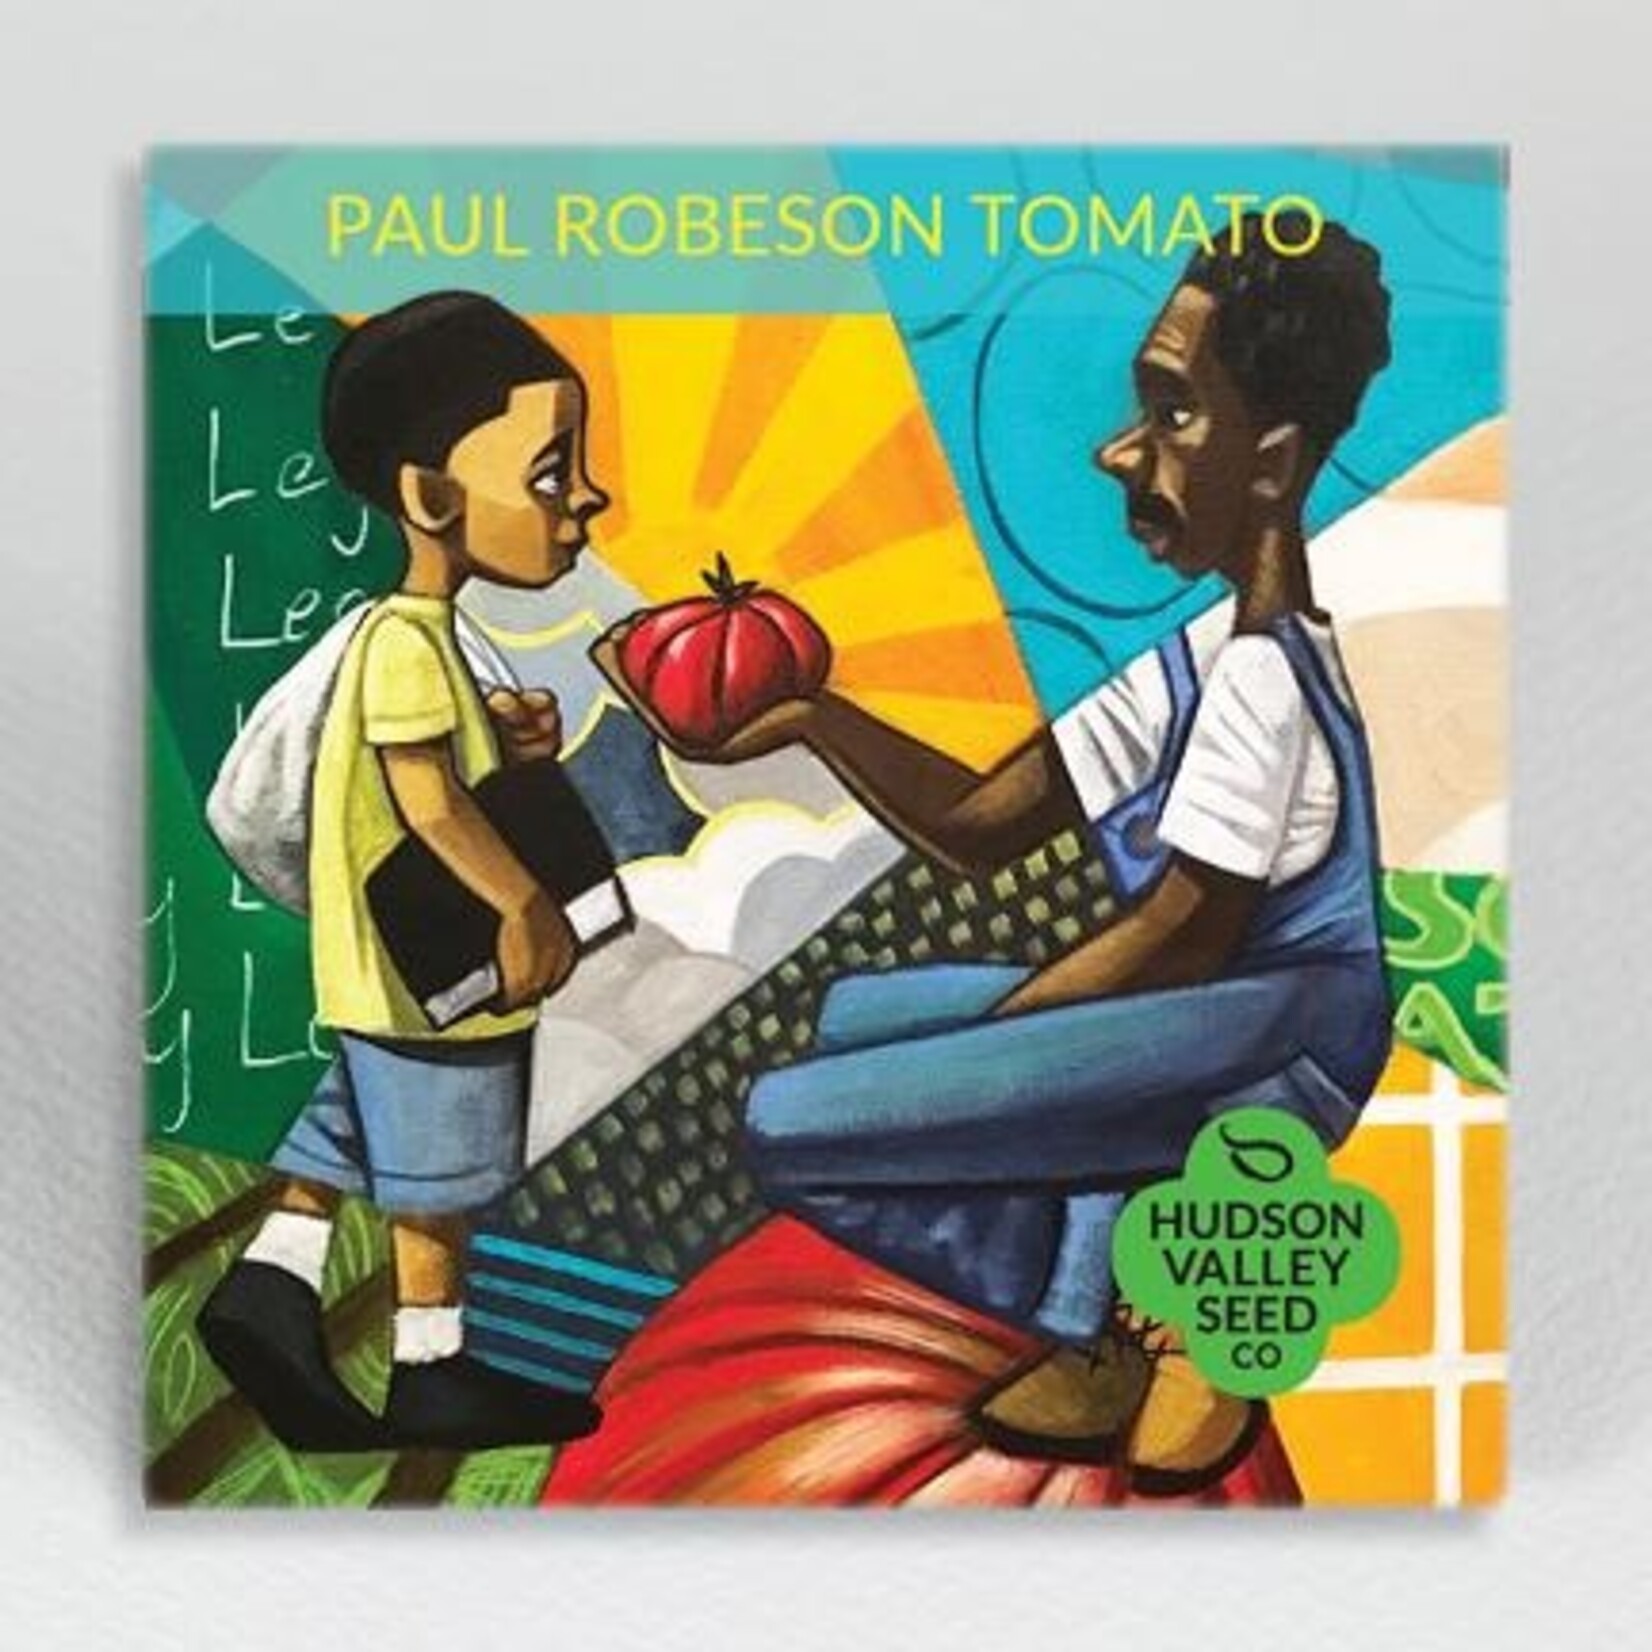 Hudson Valley Seeds Paul Robeson Tomato